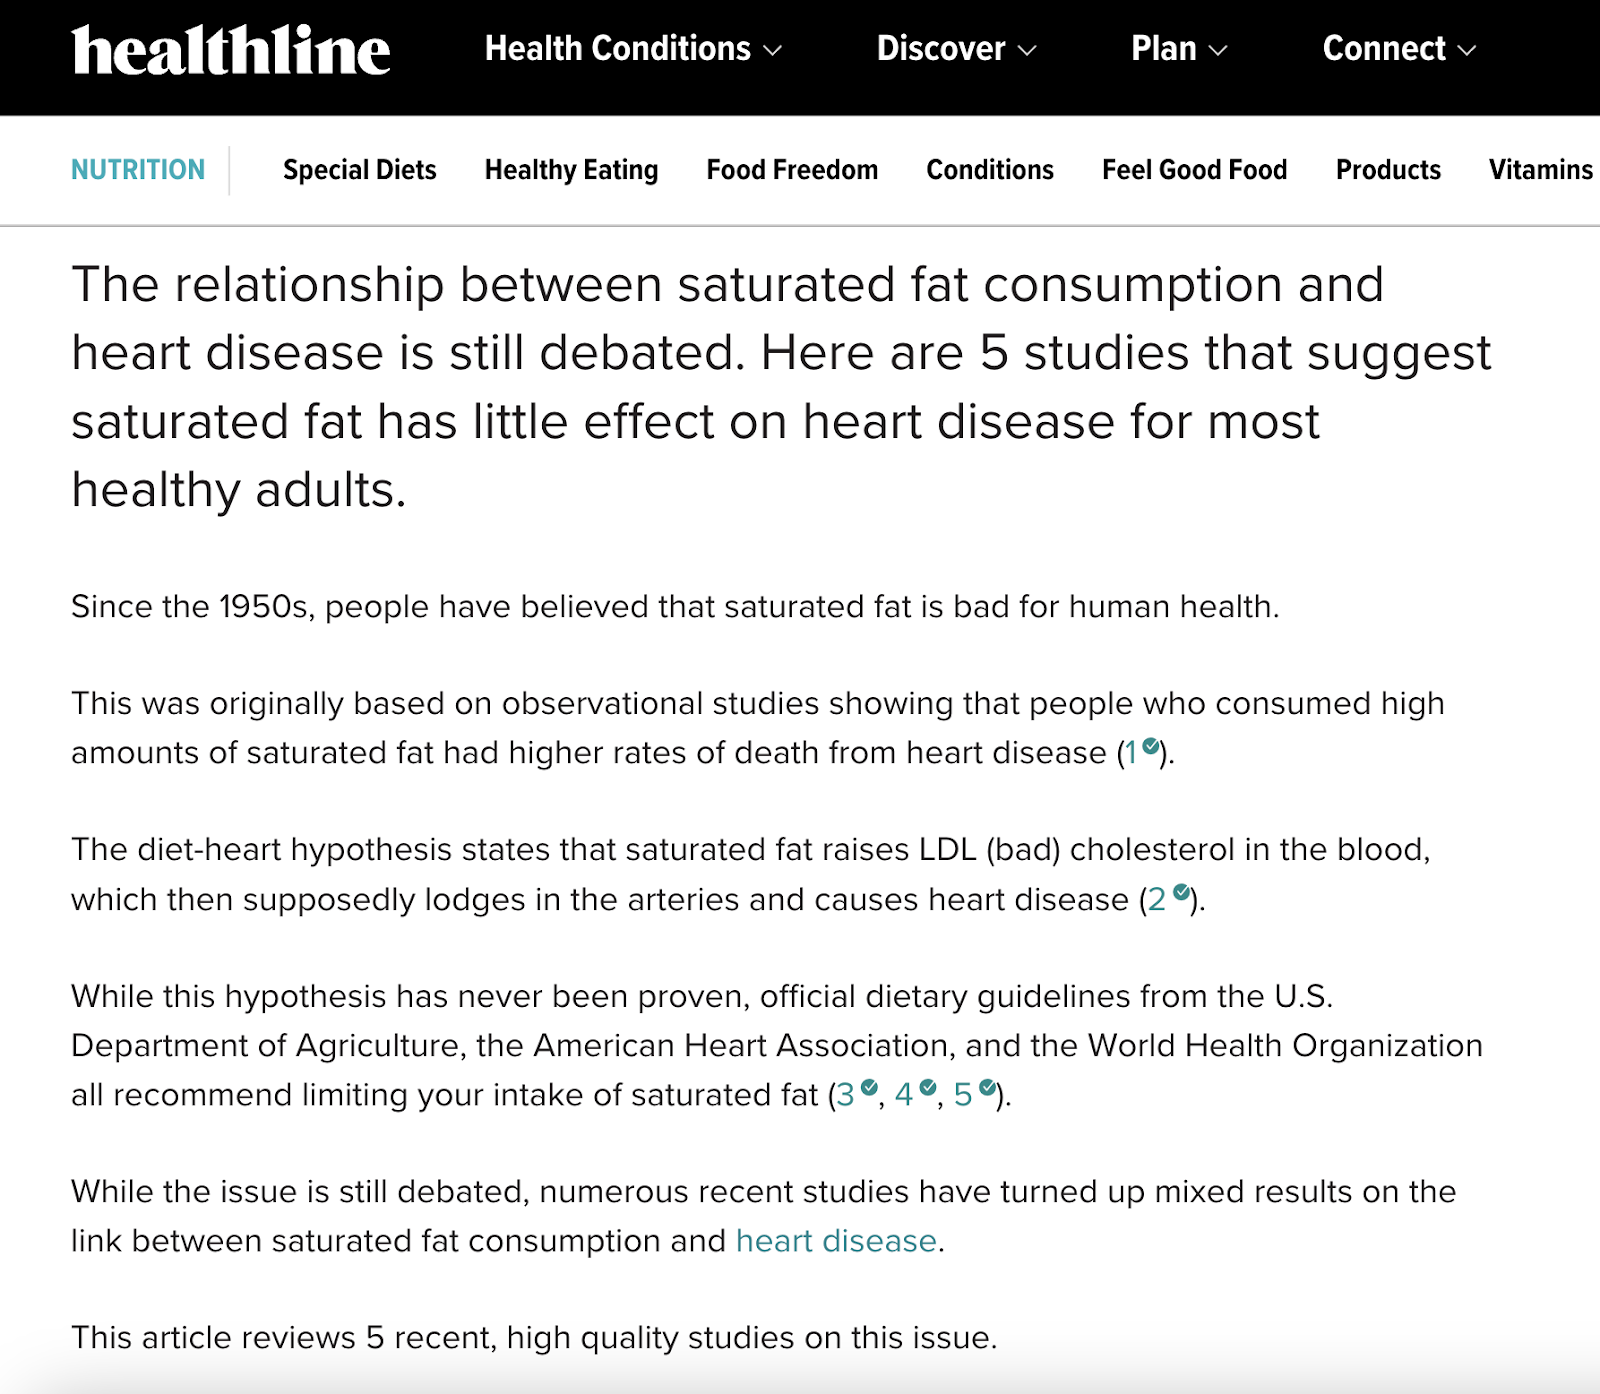 Healthline's article introduction gives a brief discussion about saturated fat and its impact on heart health